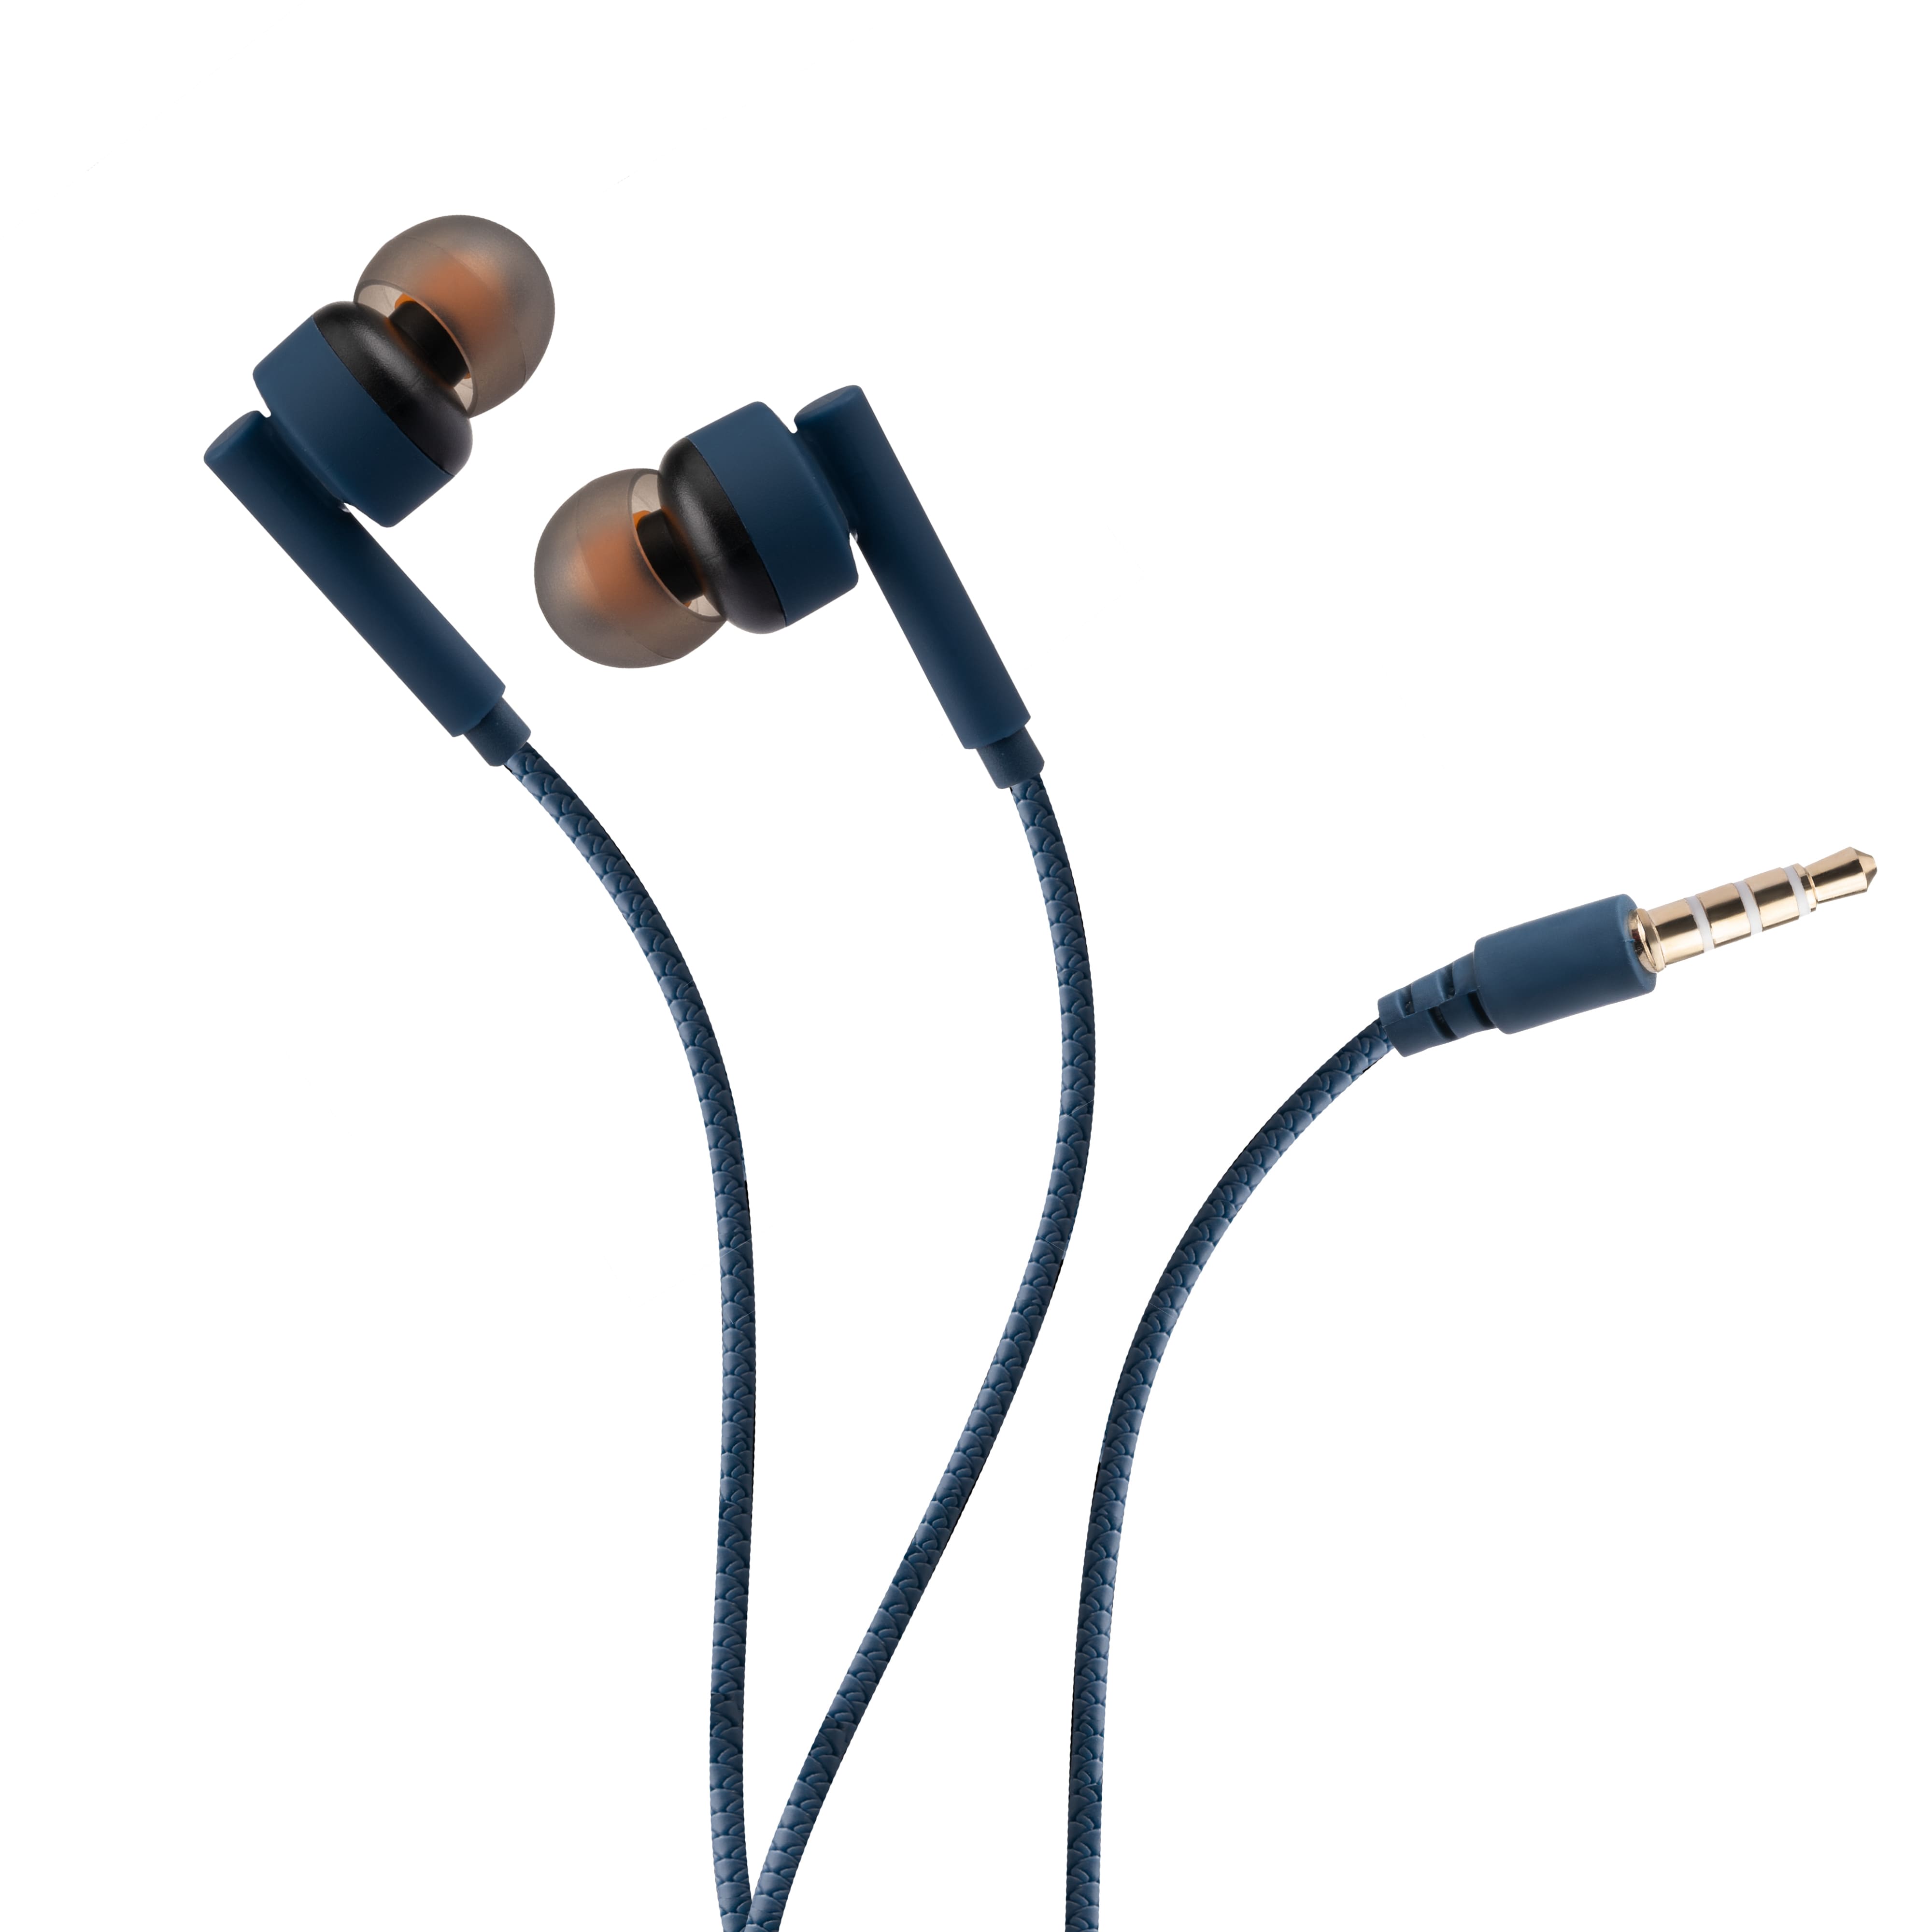 Lapcare WOOBUDS VI wired Earbuds with inbuilt MIC -Blue (LBD-606)